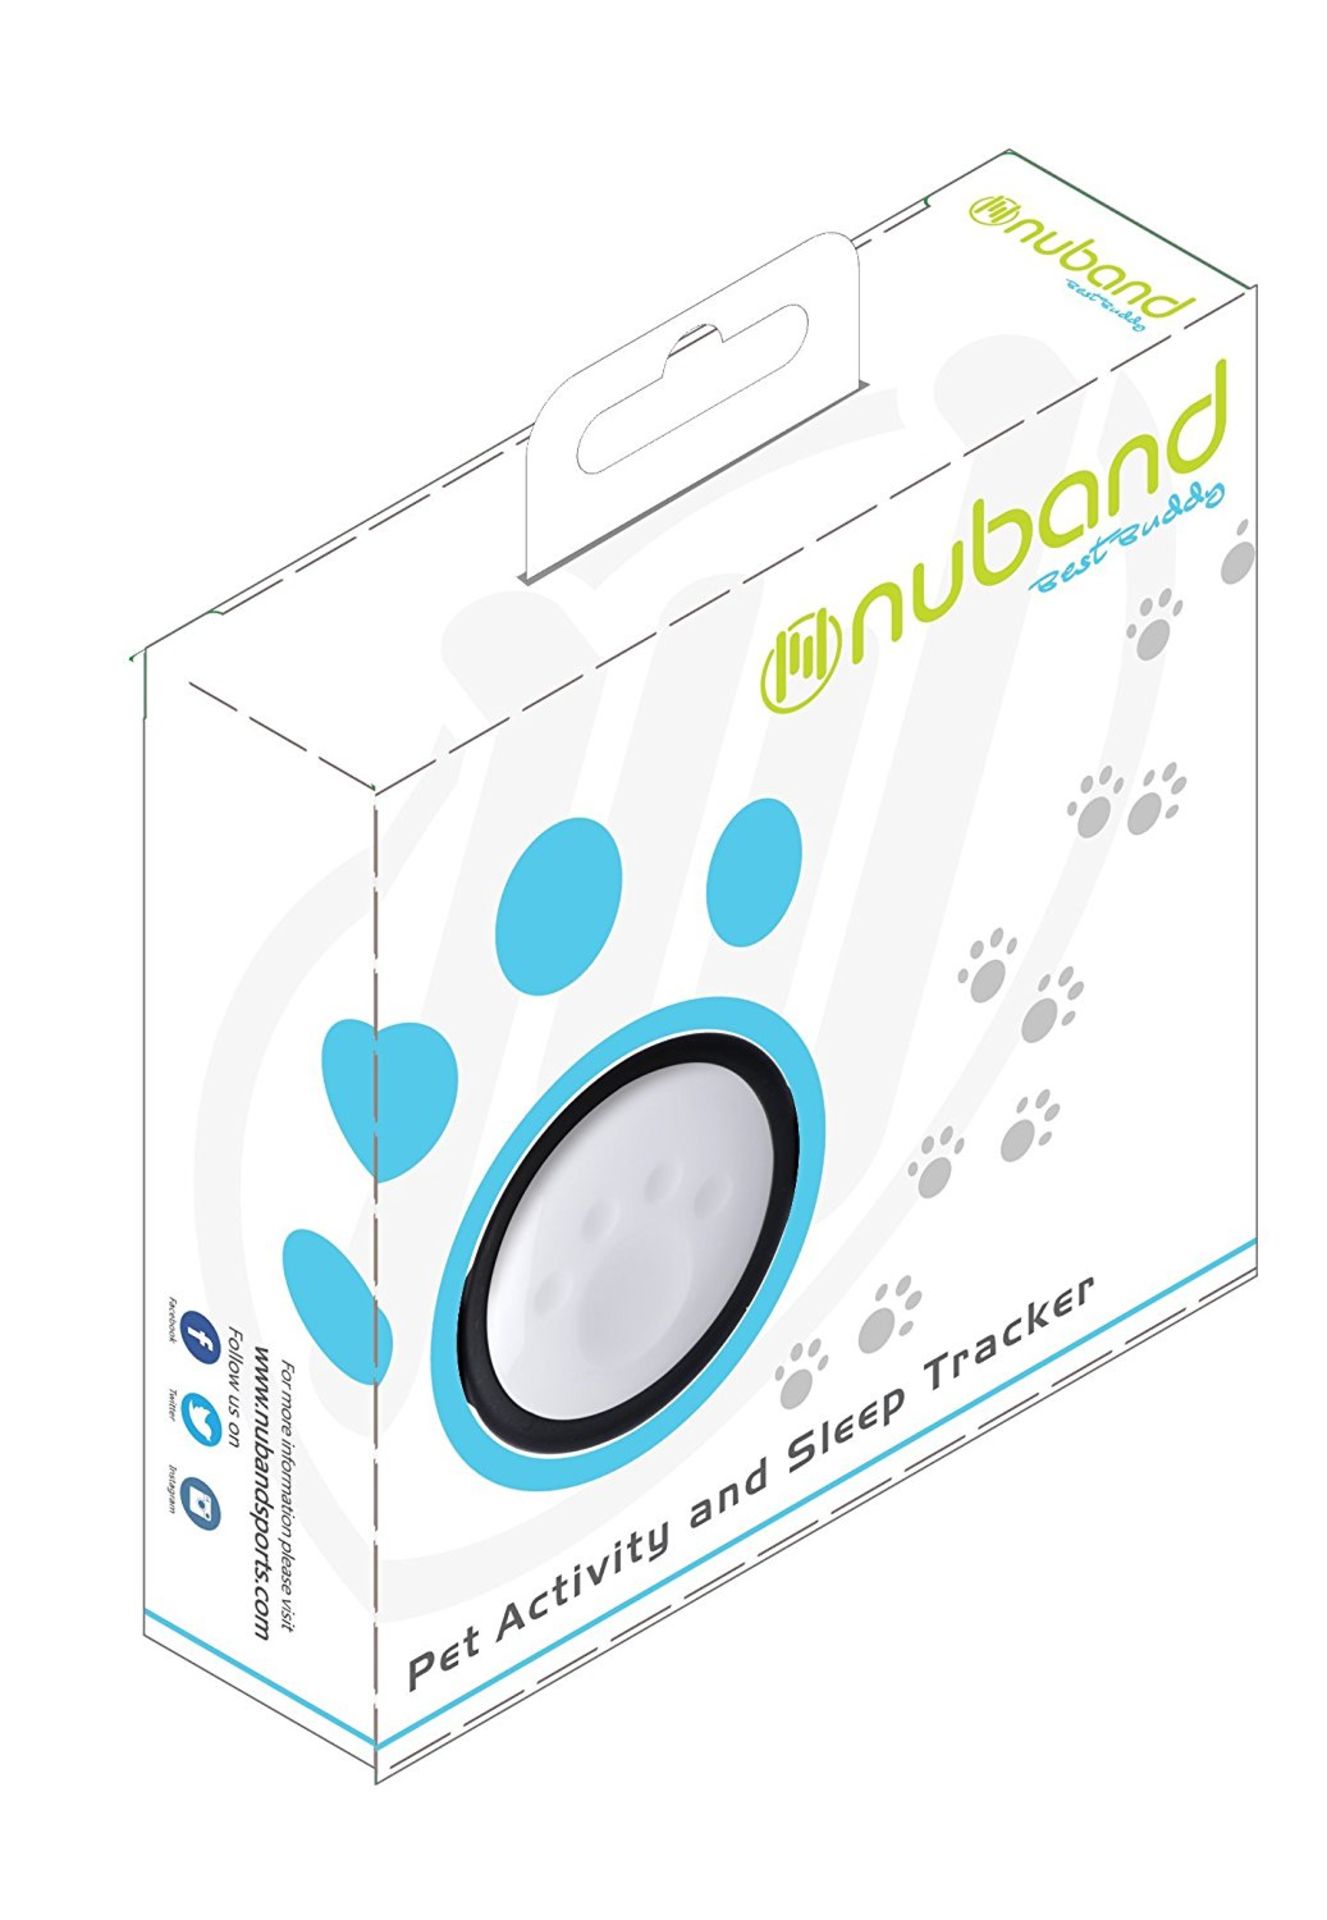 V Brand New Pet Activity & Sleep Tracker - Transmit Data to Smartphone App For Android & iOS -